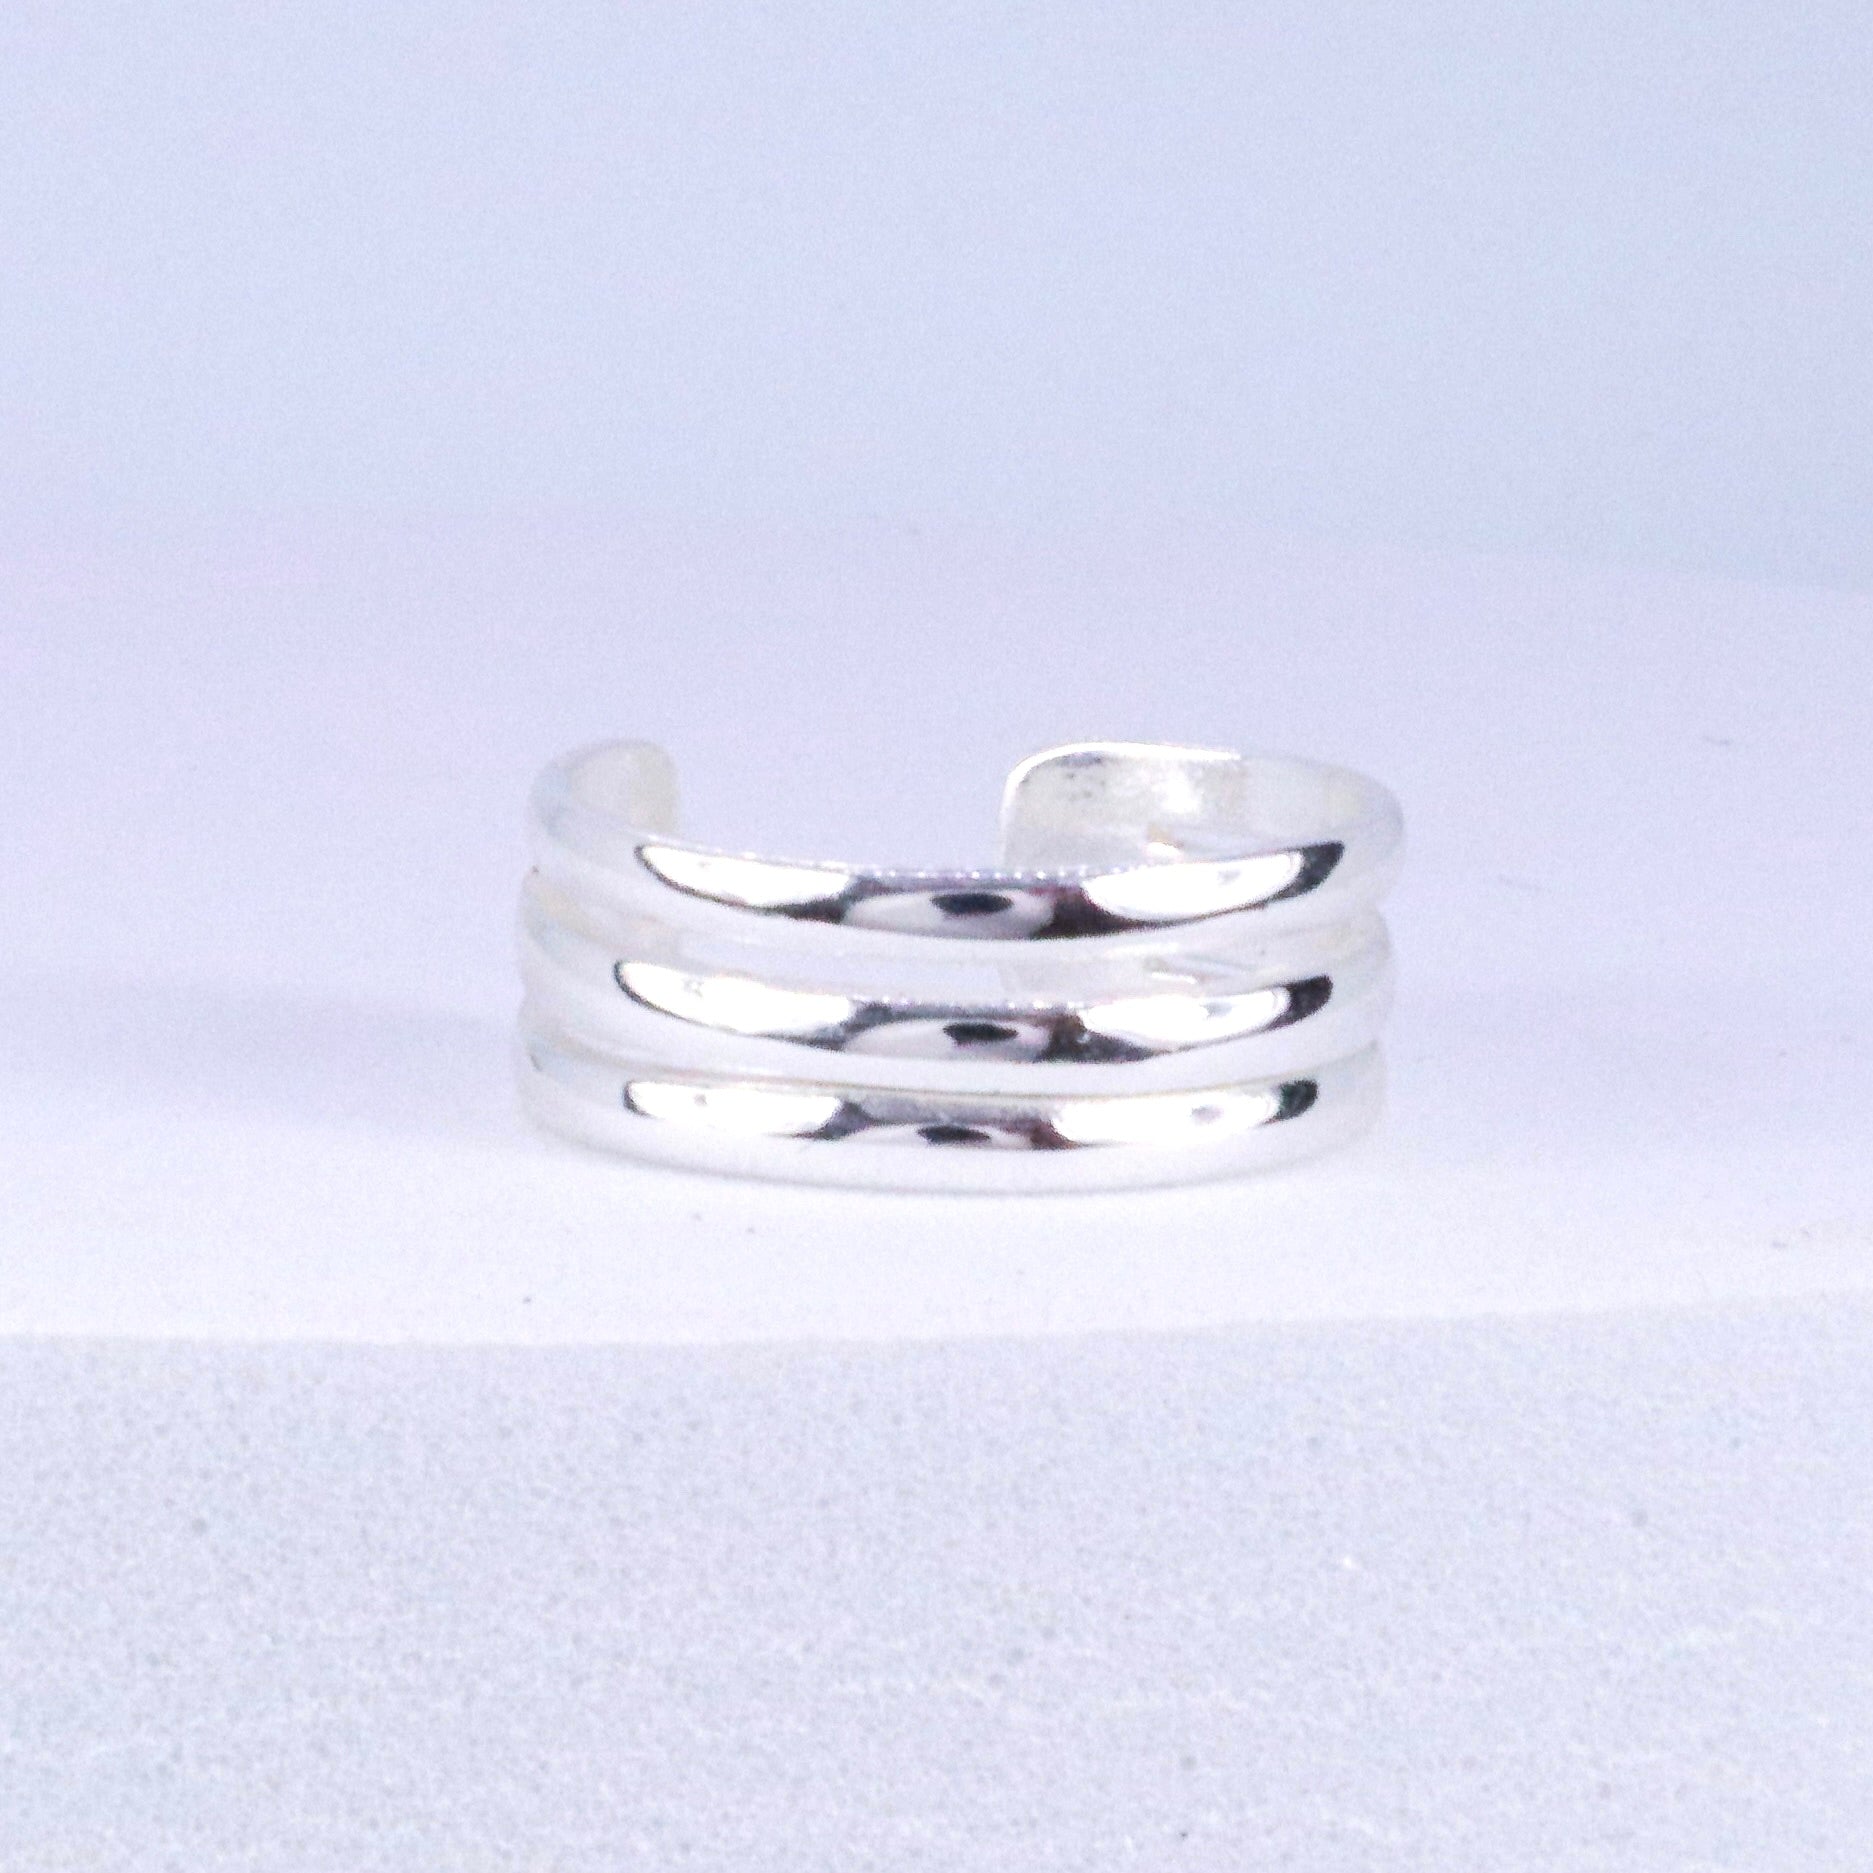 Double Layer High Polish Sterling Silver Toe Ring